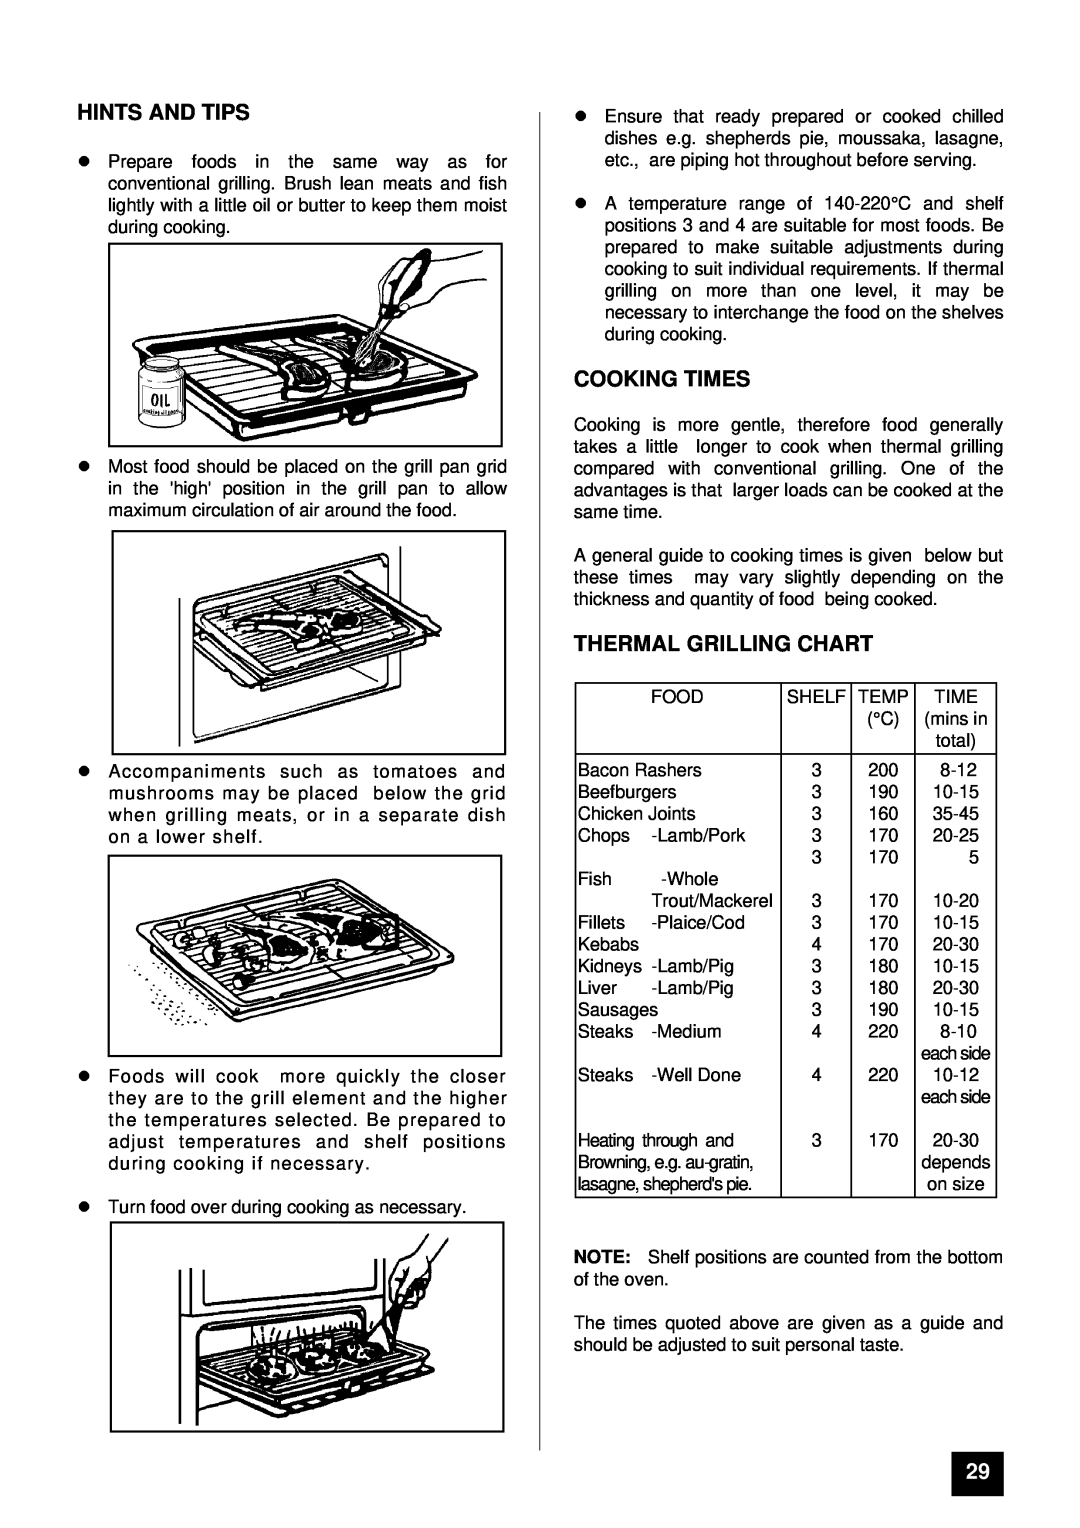 Tricity Bendix BS 613/2 installation instructions Cooking Times, Thermal Grilling Chart, lHINTS AND TIPS 